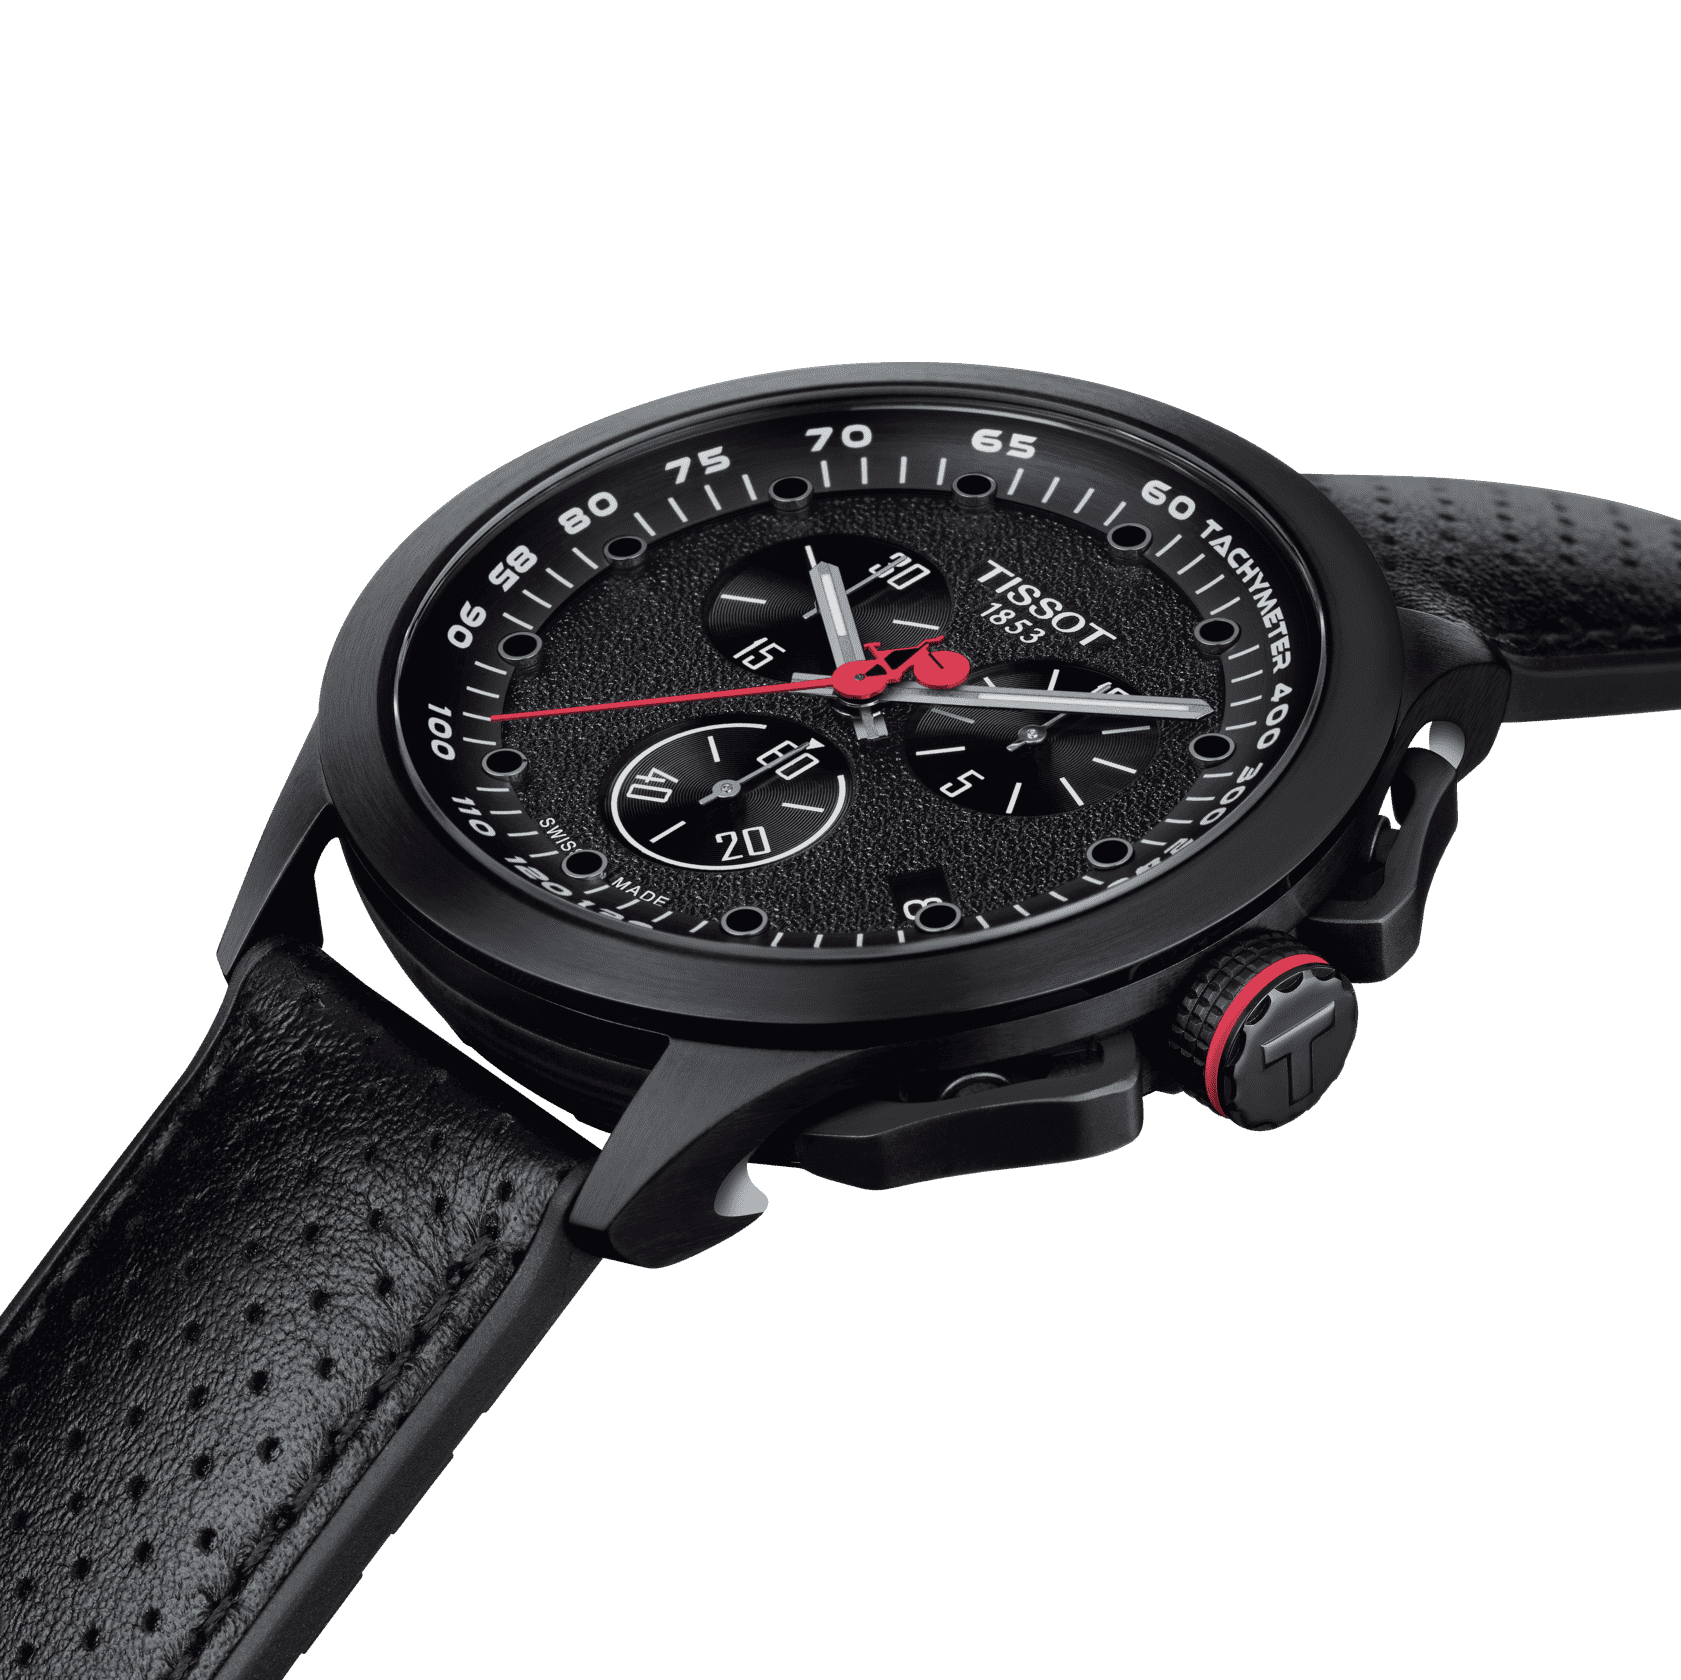 Tissot T-Race Cycling Giro d'Italia  2022 Special Edition